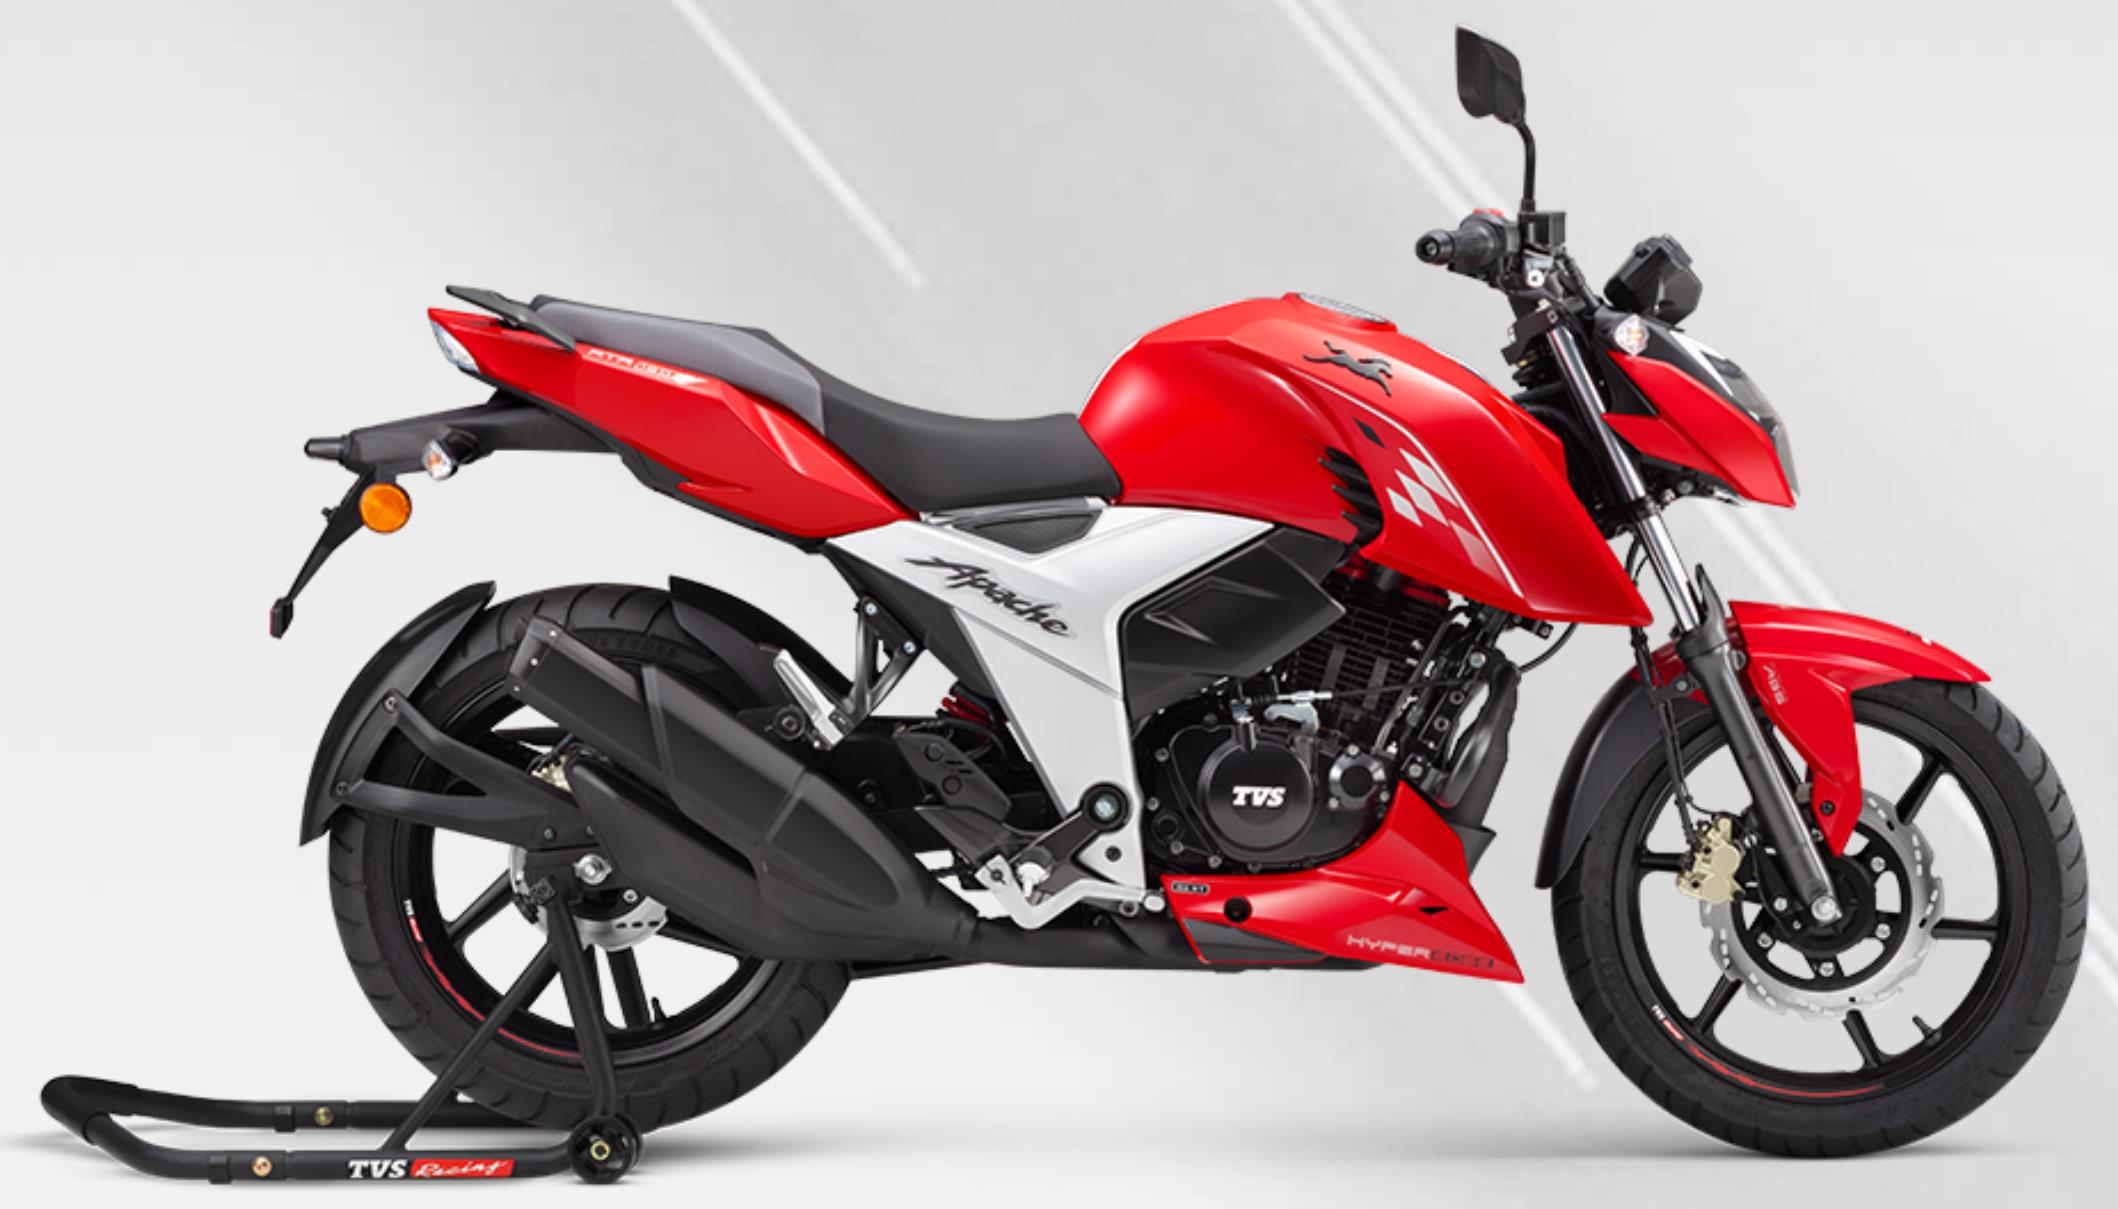 Tvs Apache Rtr 160 4v Disc Price Top Speed Mileage In India